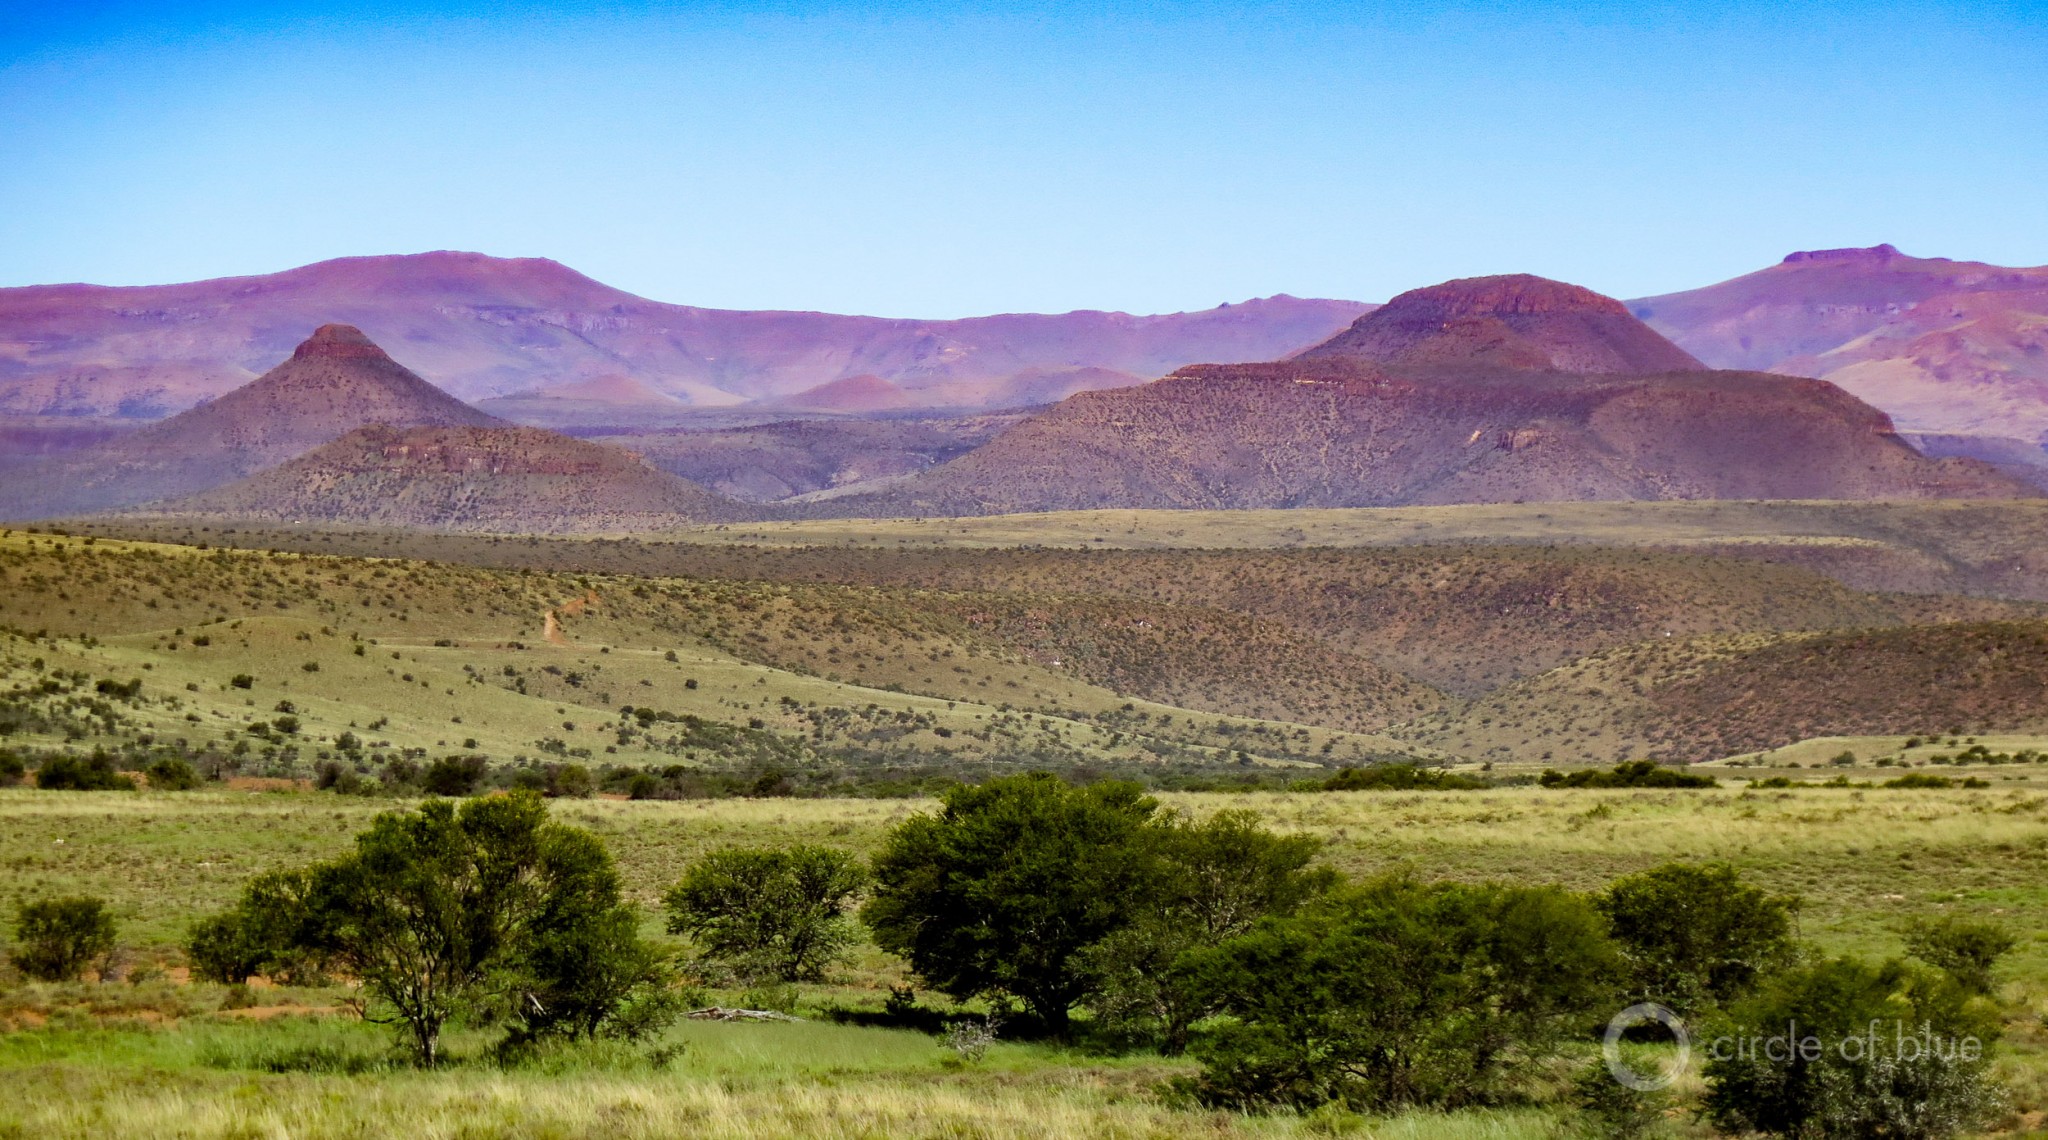  Thinly populated, with towns hours distant from one another, the Karoo’s hot desert extends to the sides of mammoth tabletop ridges that turn purple at dusk. This canvas of color and light, of rock and mountain and glorious sunsets, has inspired generations of South African poets and artists. Photo © Keith Schneider / Circle of Blue